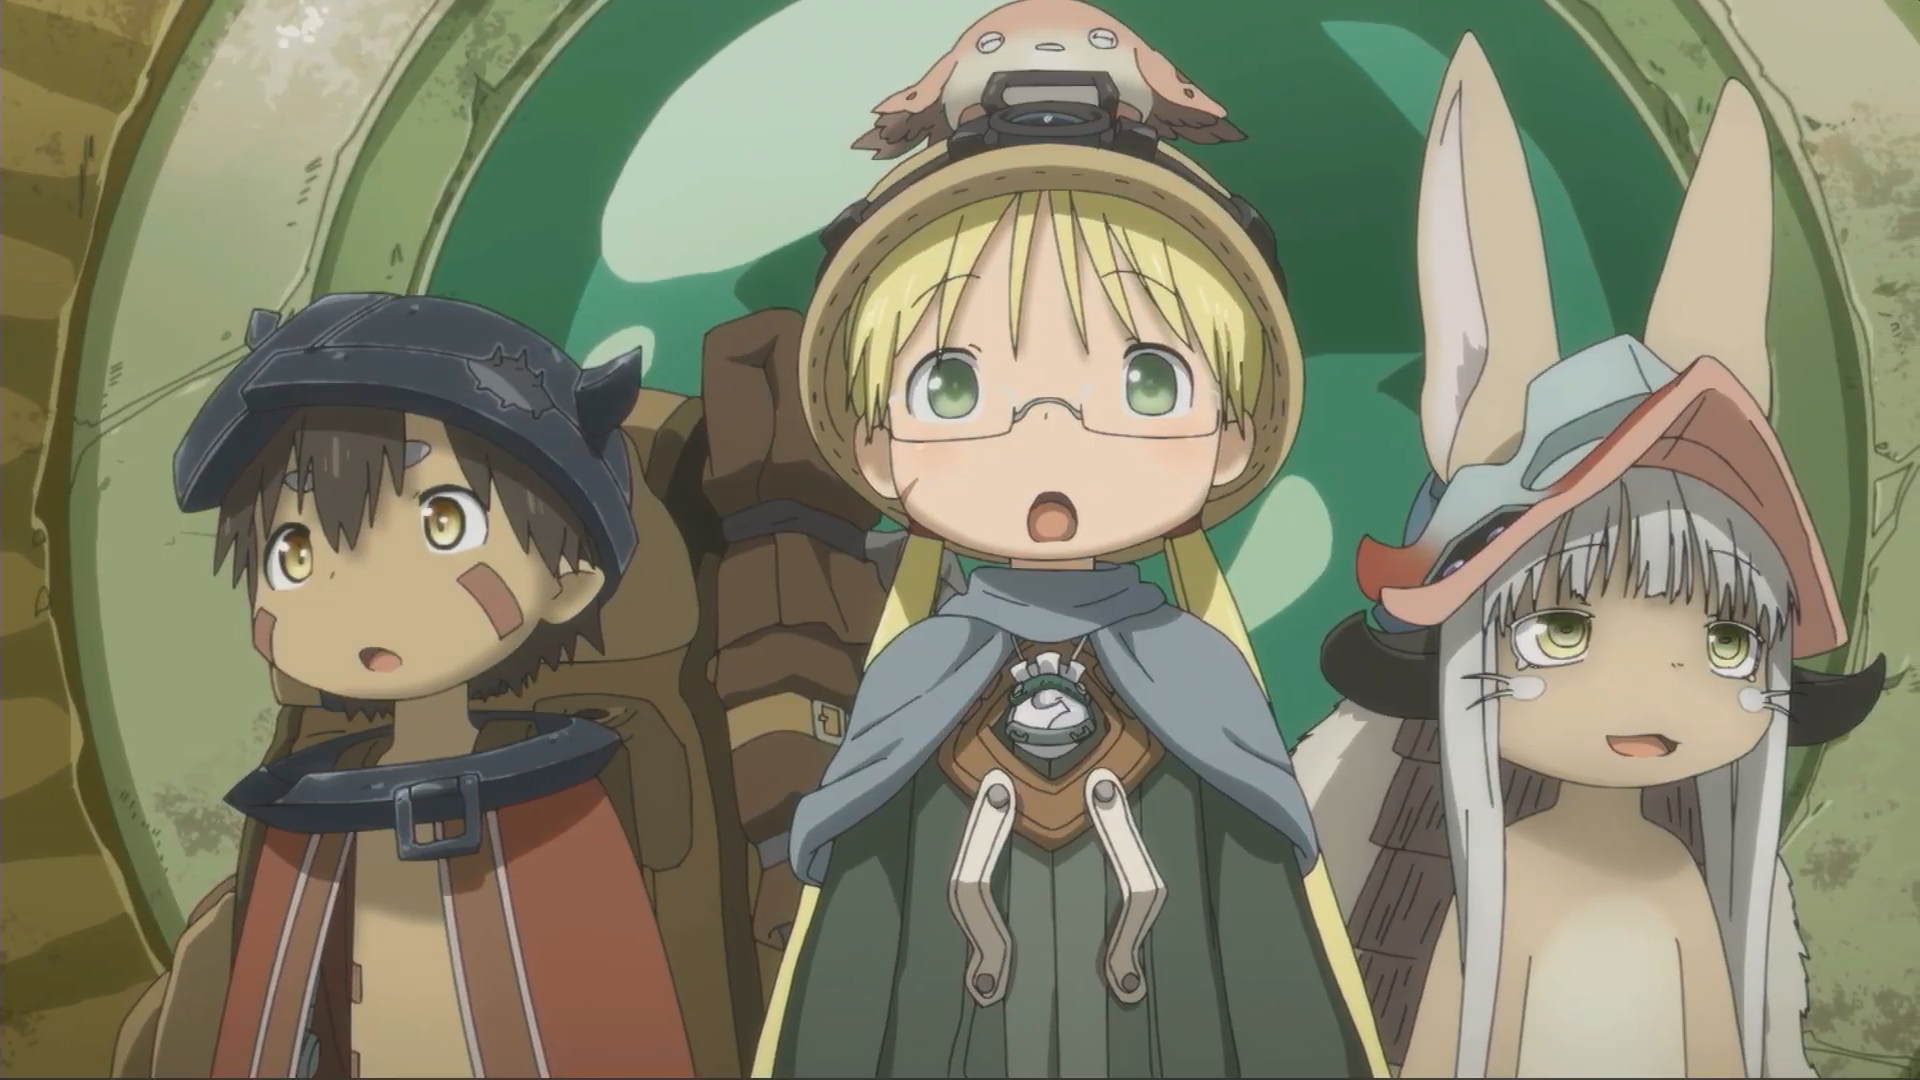 Made In Abyss RPG Gets New Trailer Showing New Systems And Ending Song